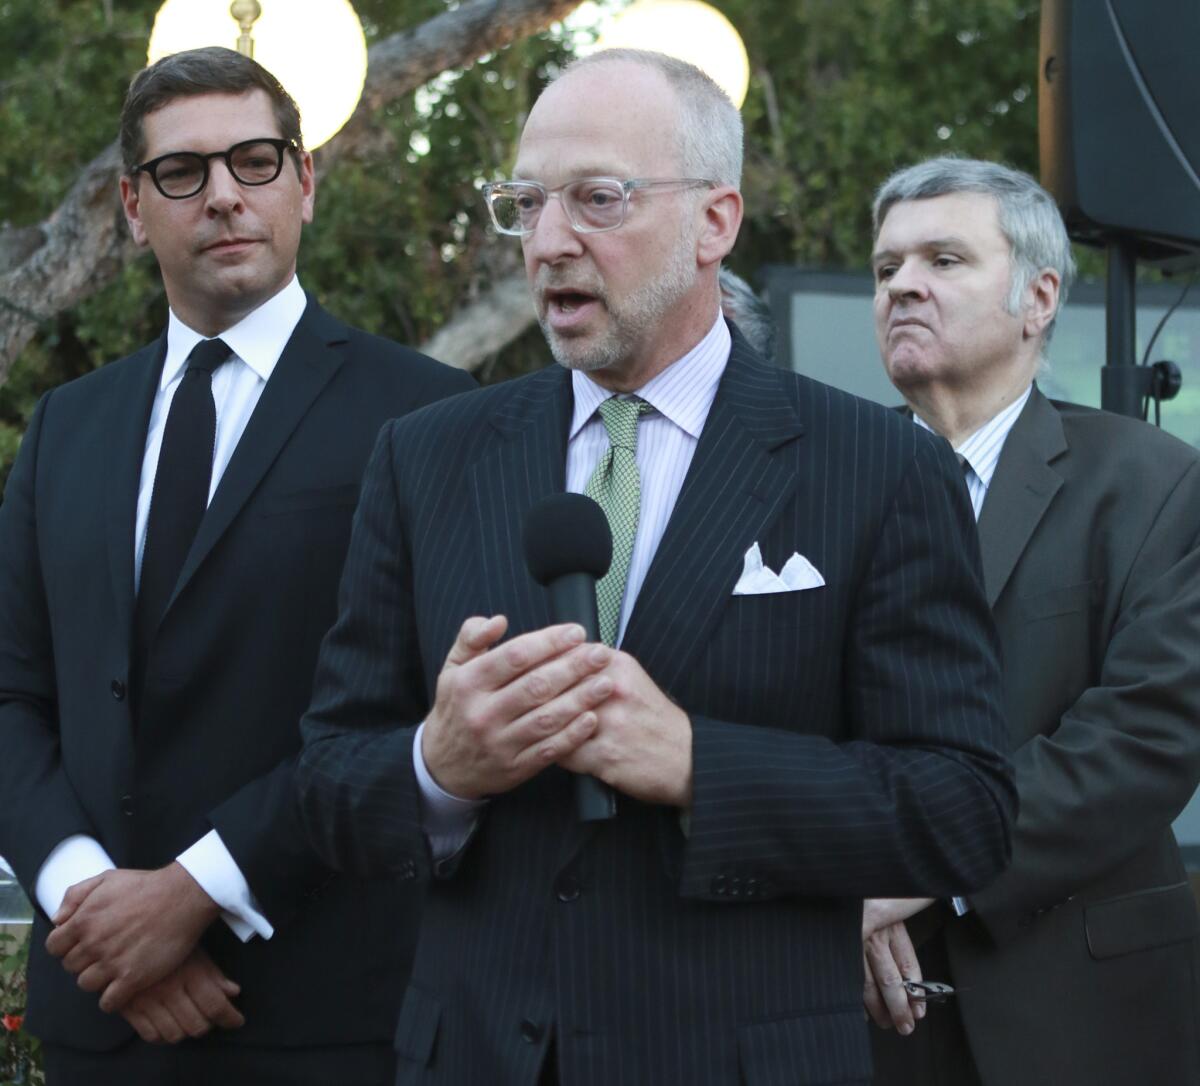 Rick Jacobs speaks at a Bastille Day reception at La Residence de France in Beverly Hills in 2016.